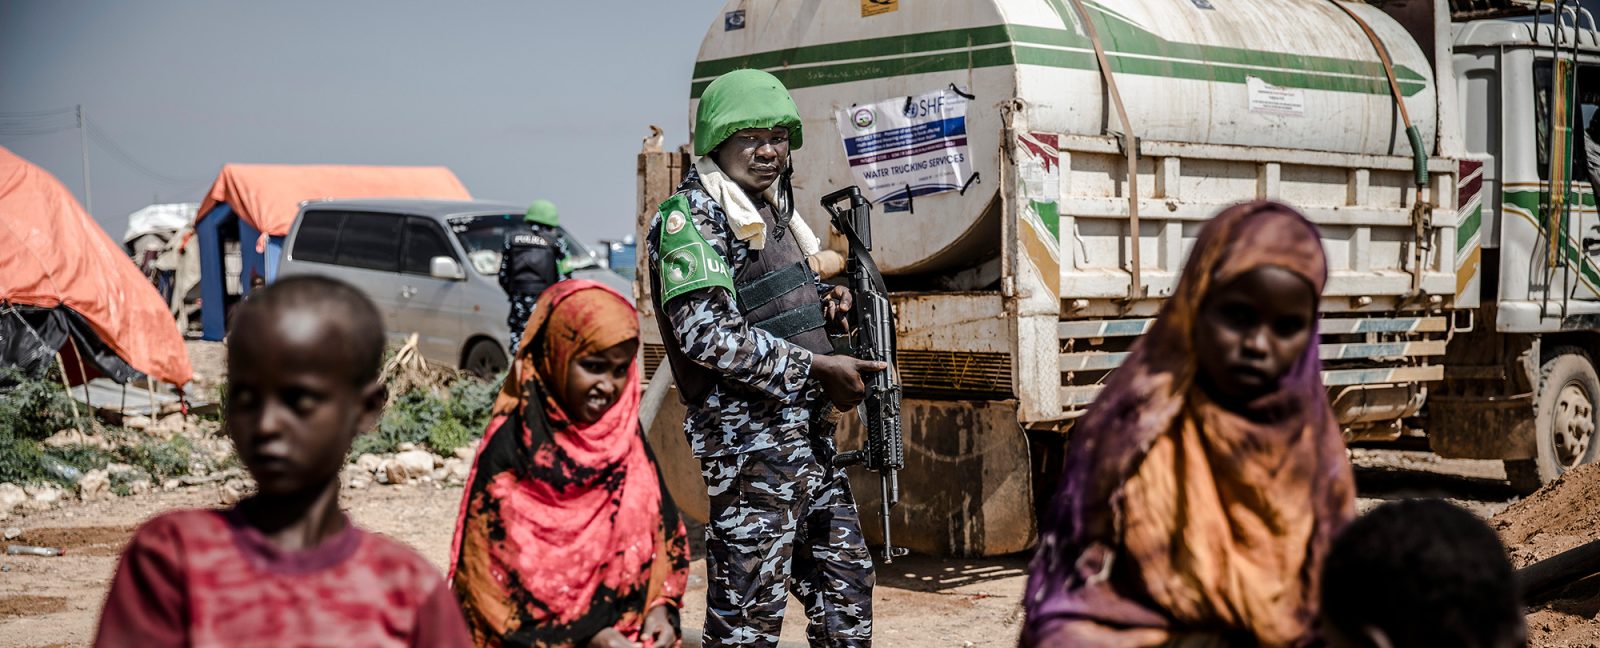 African-Led Peace Operations: A Crucial Tool for Peace and Security